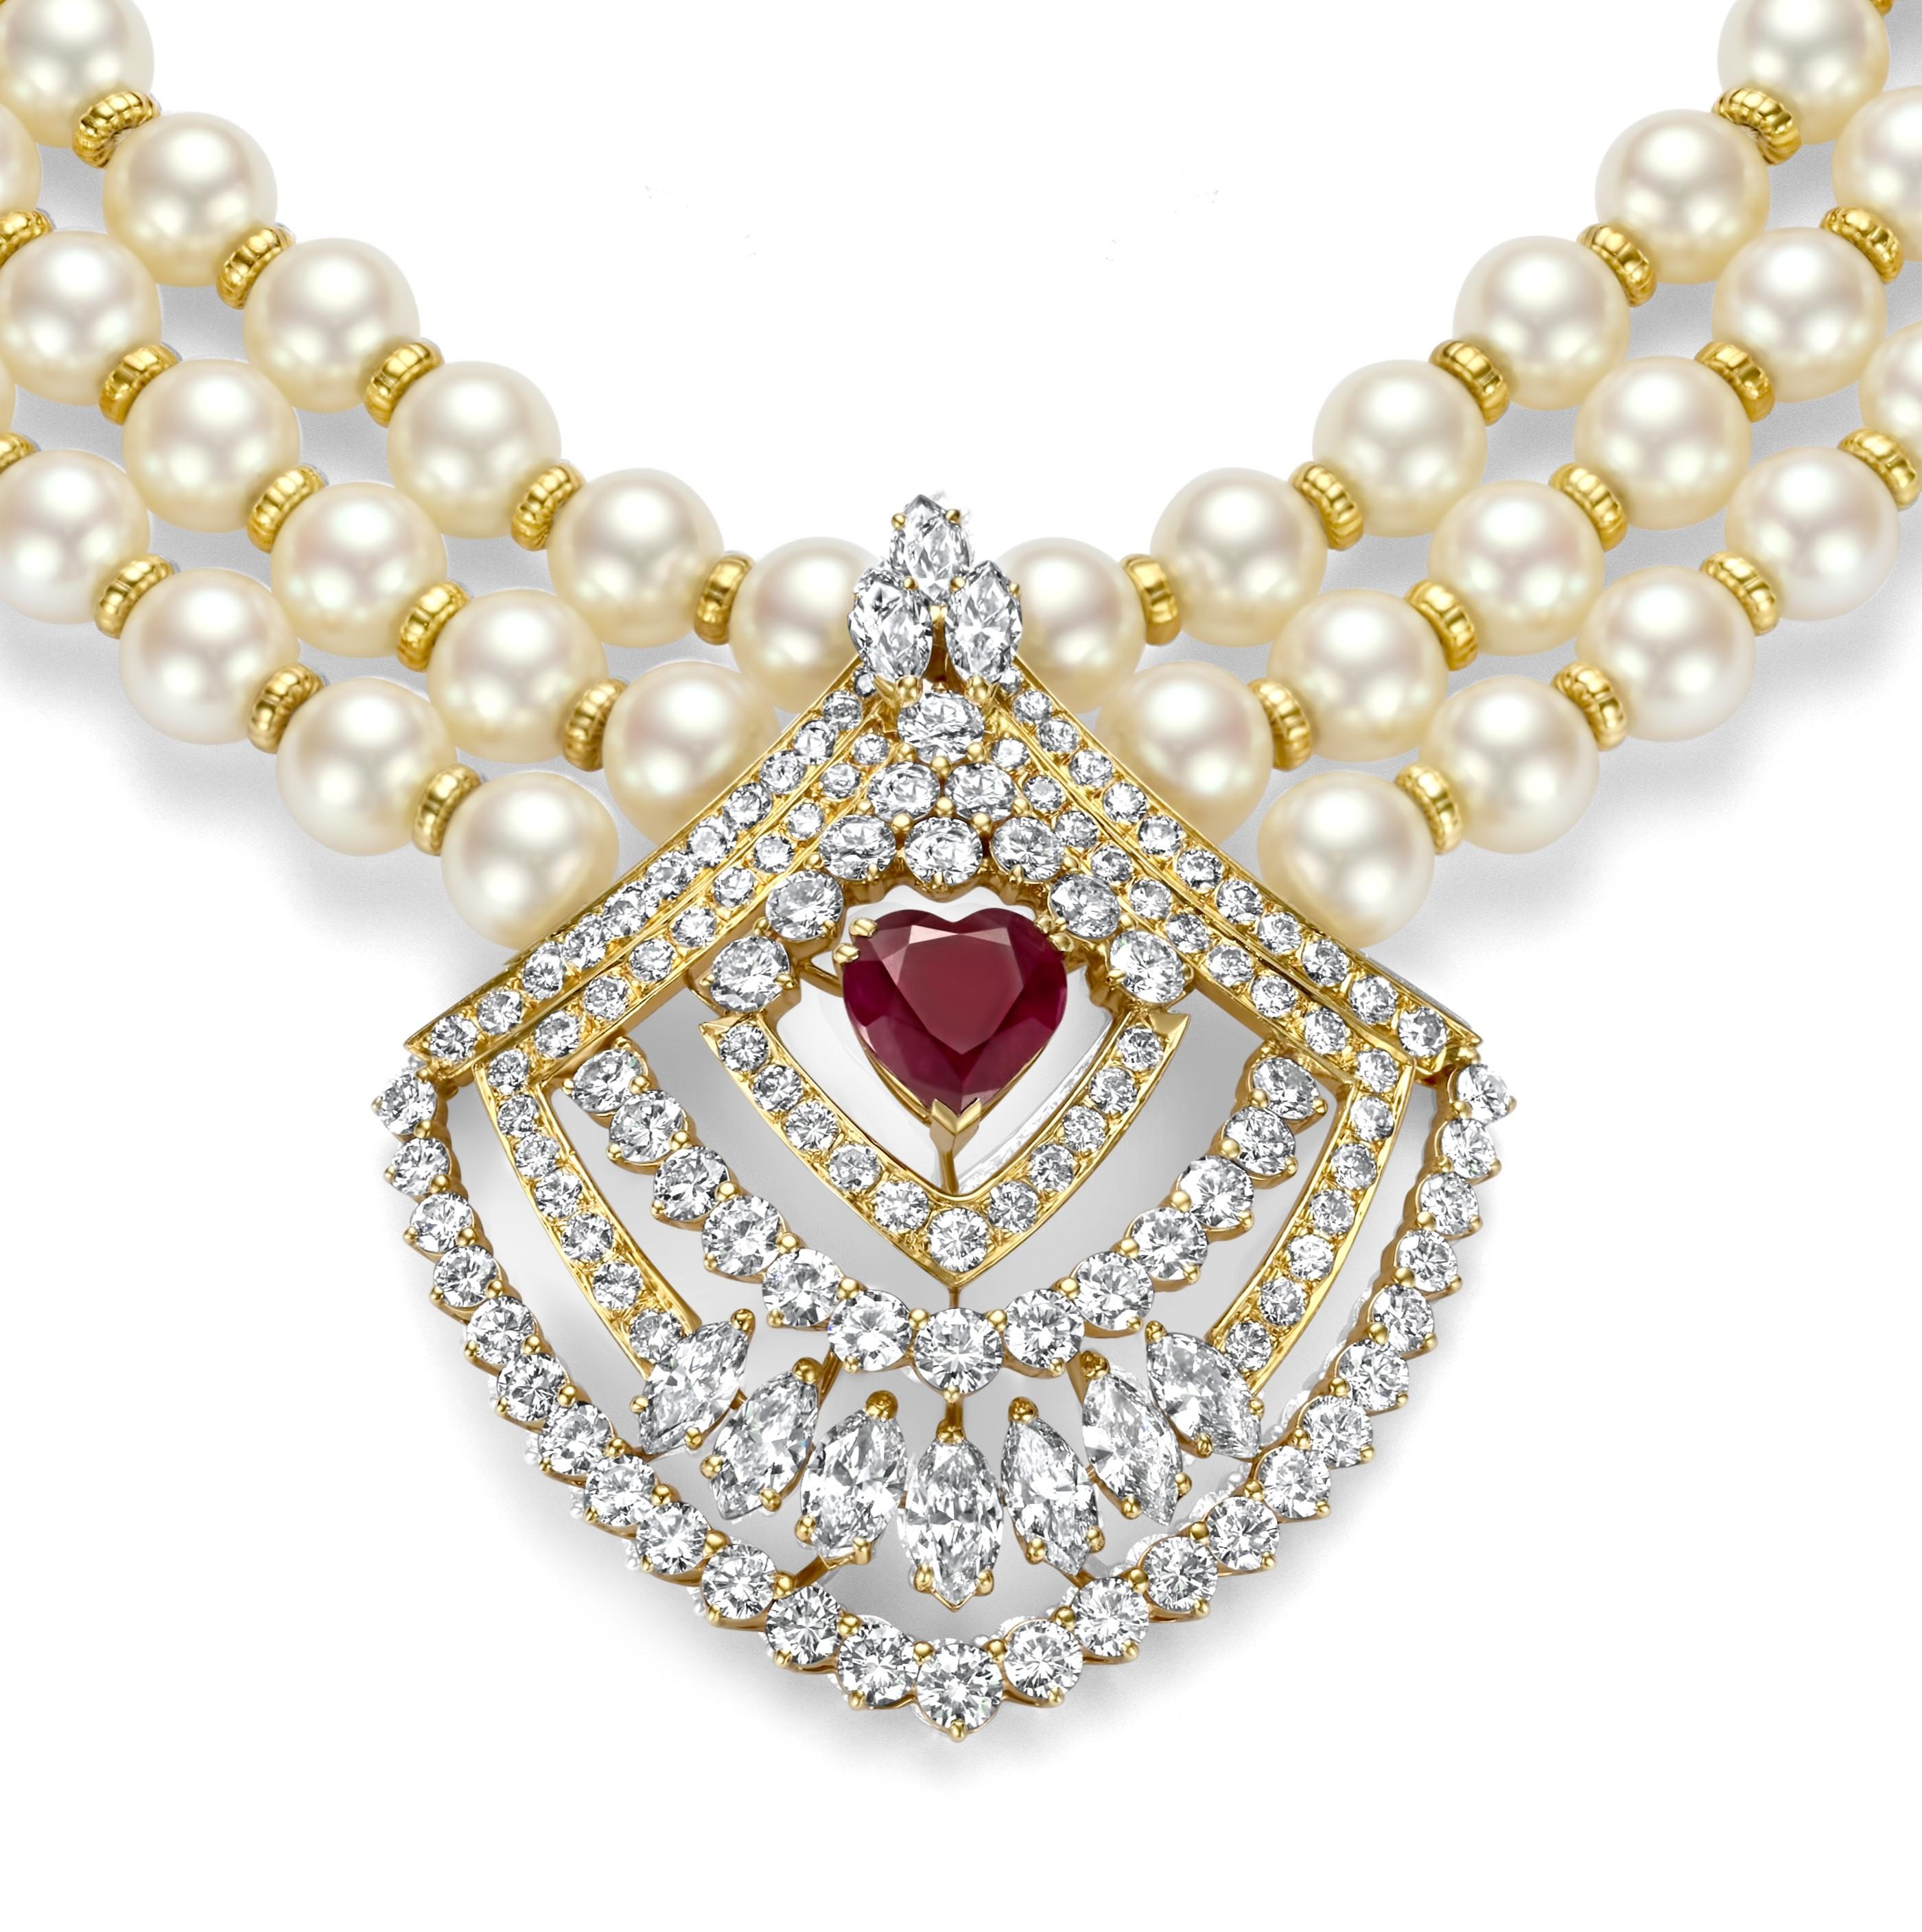 Asprey Co London Gorgeous Necklace 3 Rows Pearls, 10 ct. Diamonds, 3.6 ct. Heart Shaped No Heat Ruby from Estate Sultan of Oman Qaboos Bin Said

Ruby: Natural, heart shaped, brilliant cut, vivid to deep red ruby, No indications of treatment 3.6 ct.